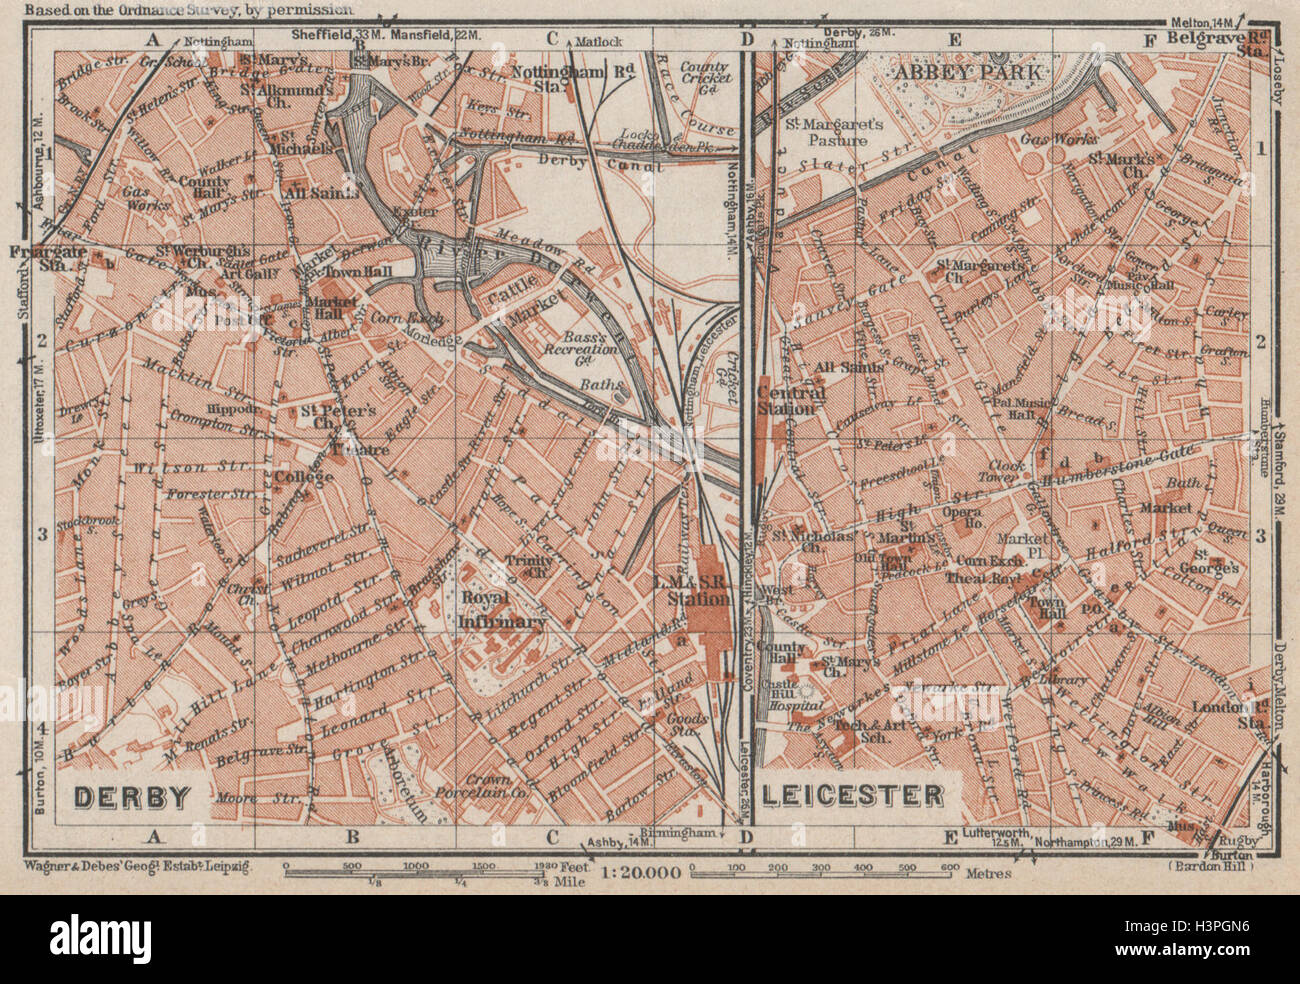 DERBY & LEICESTER antique town city plans. Midlands. BAEDEKER 1927 old map Stock Photo